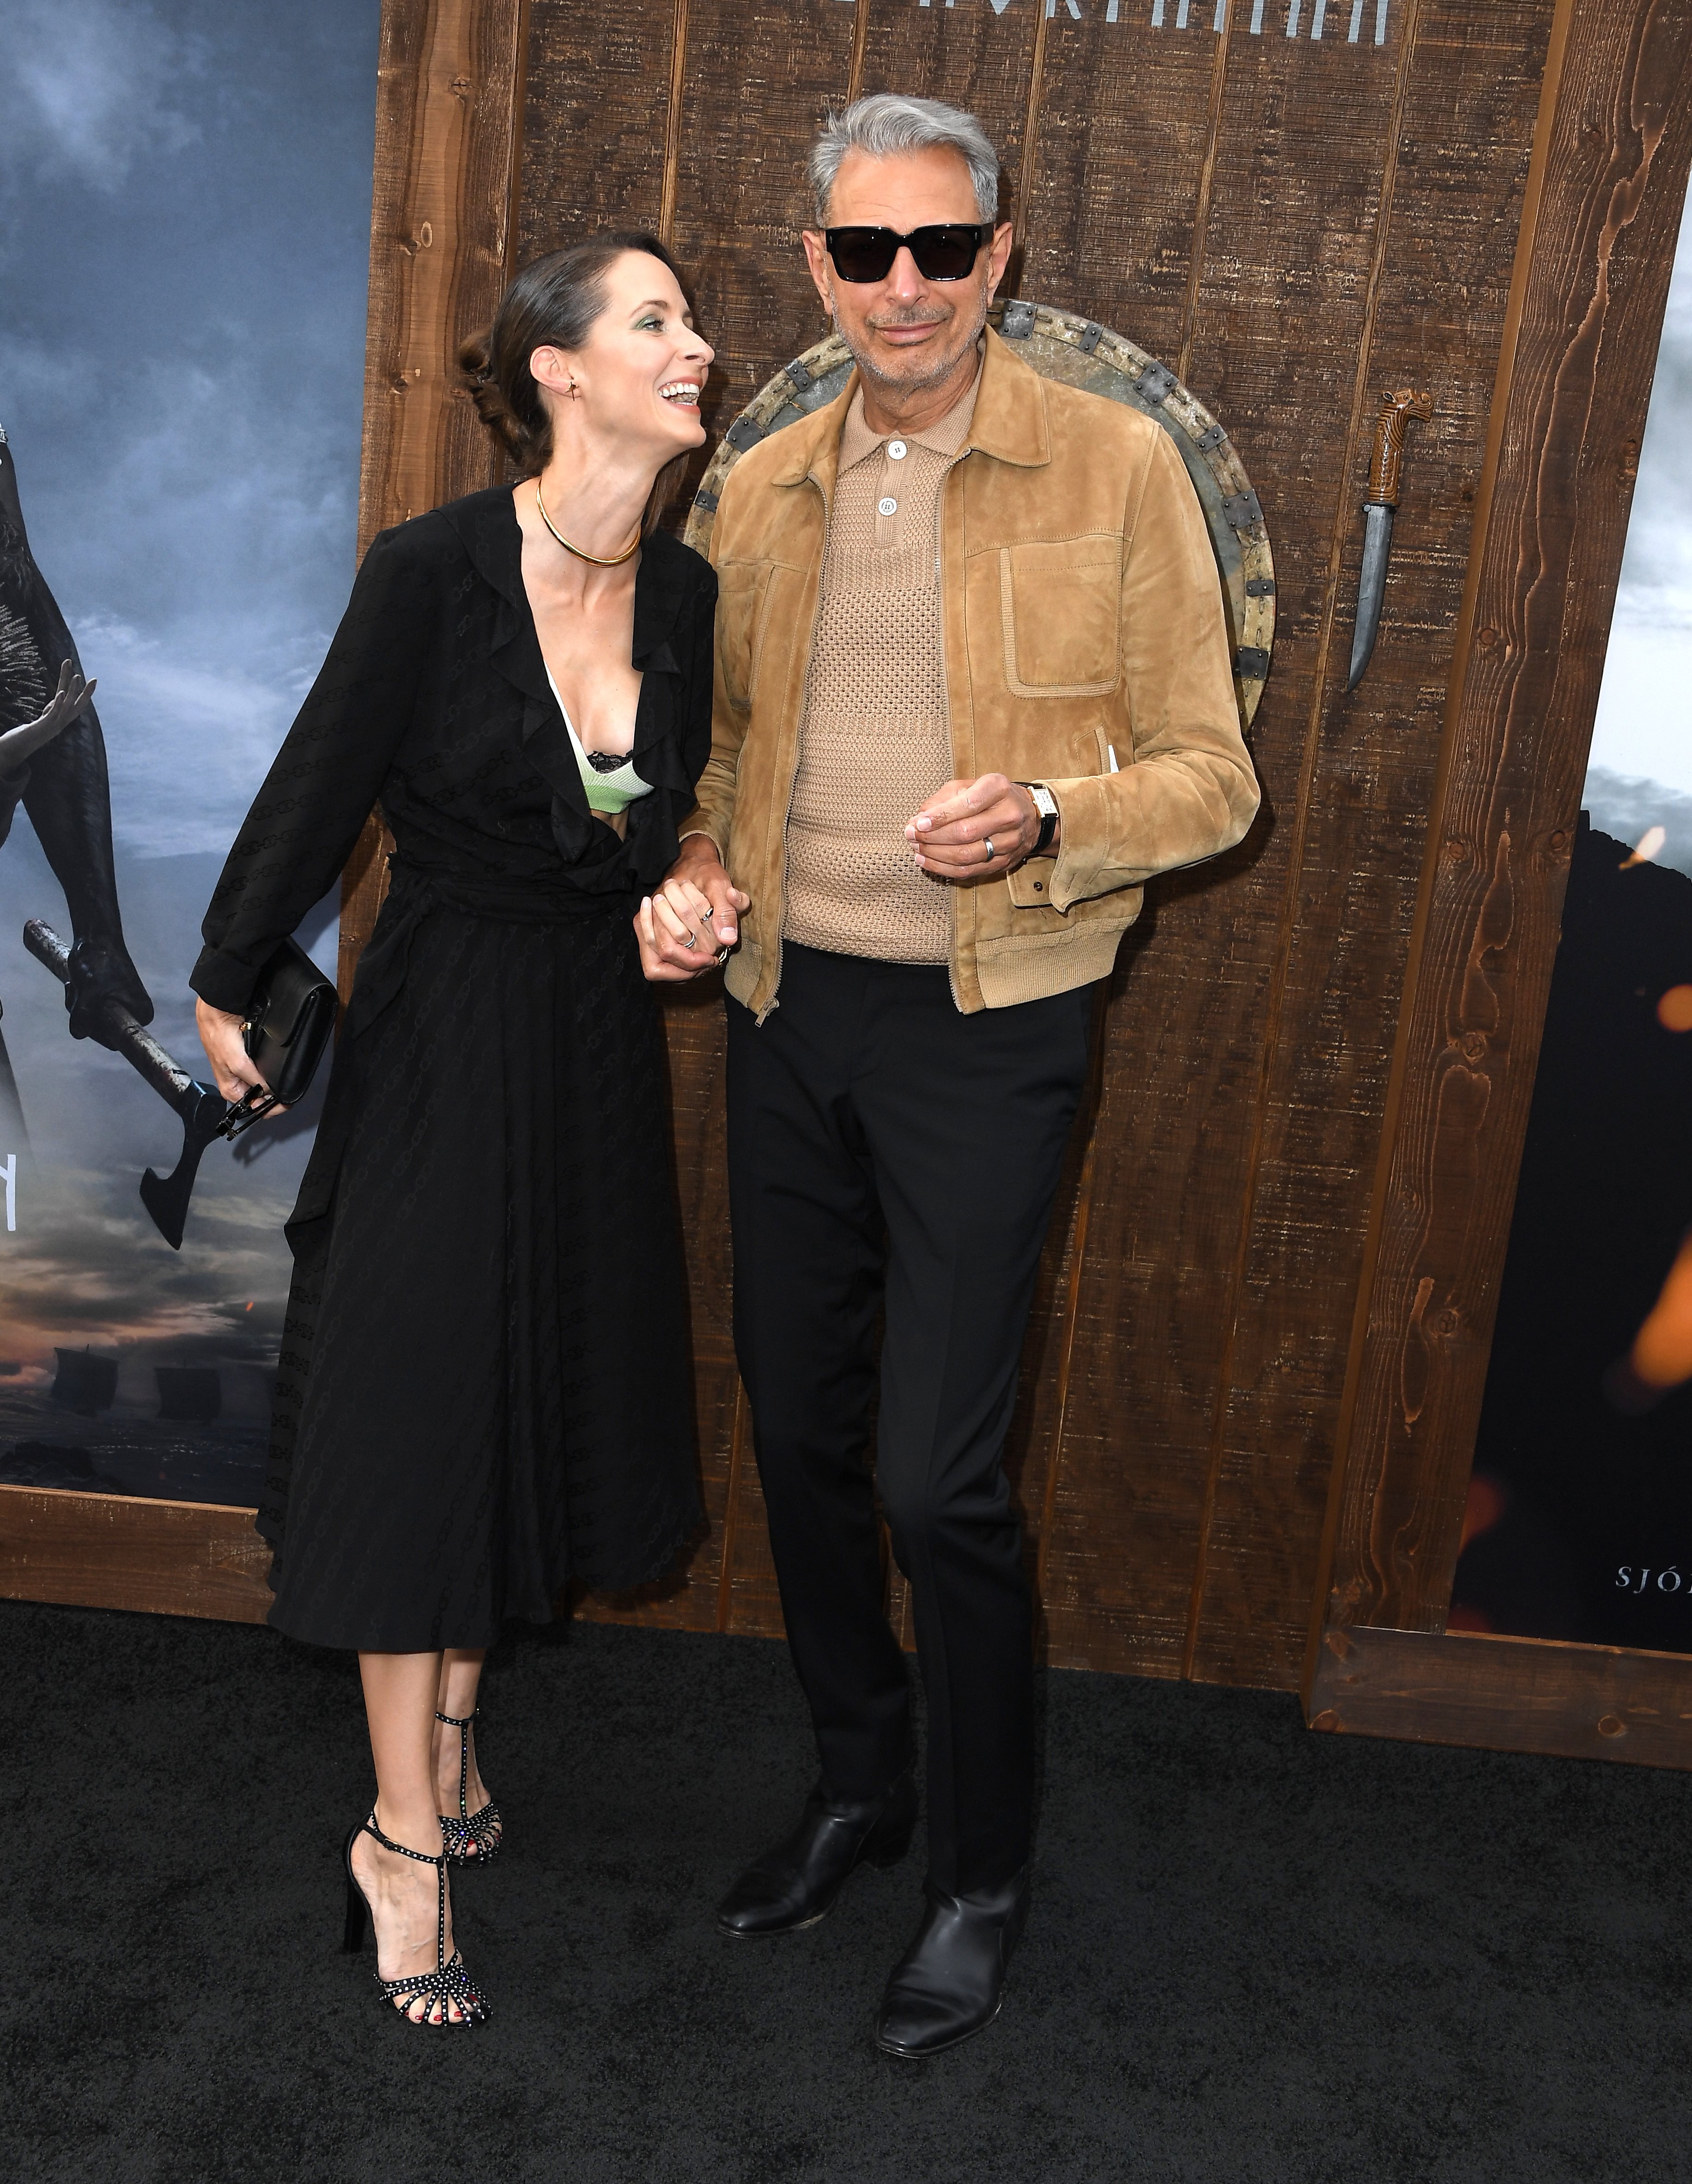  Jeff Goldblum and wife Emilie Livingston arrives at the Los Angeles Premiere Of "The Northman" at TCL Chinese Theatre on April 18, 2022 in Hollywood, California | Source: Getty Images 